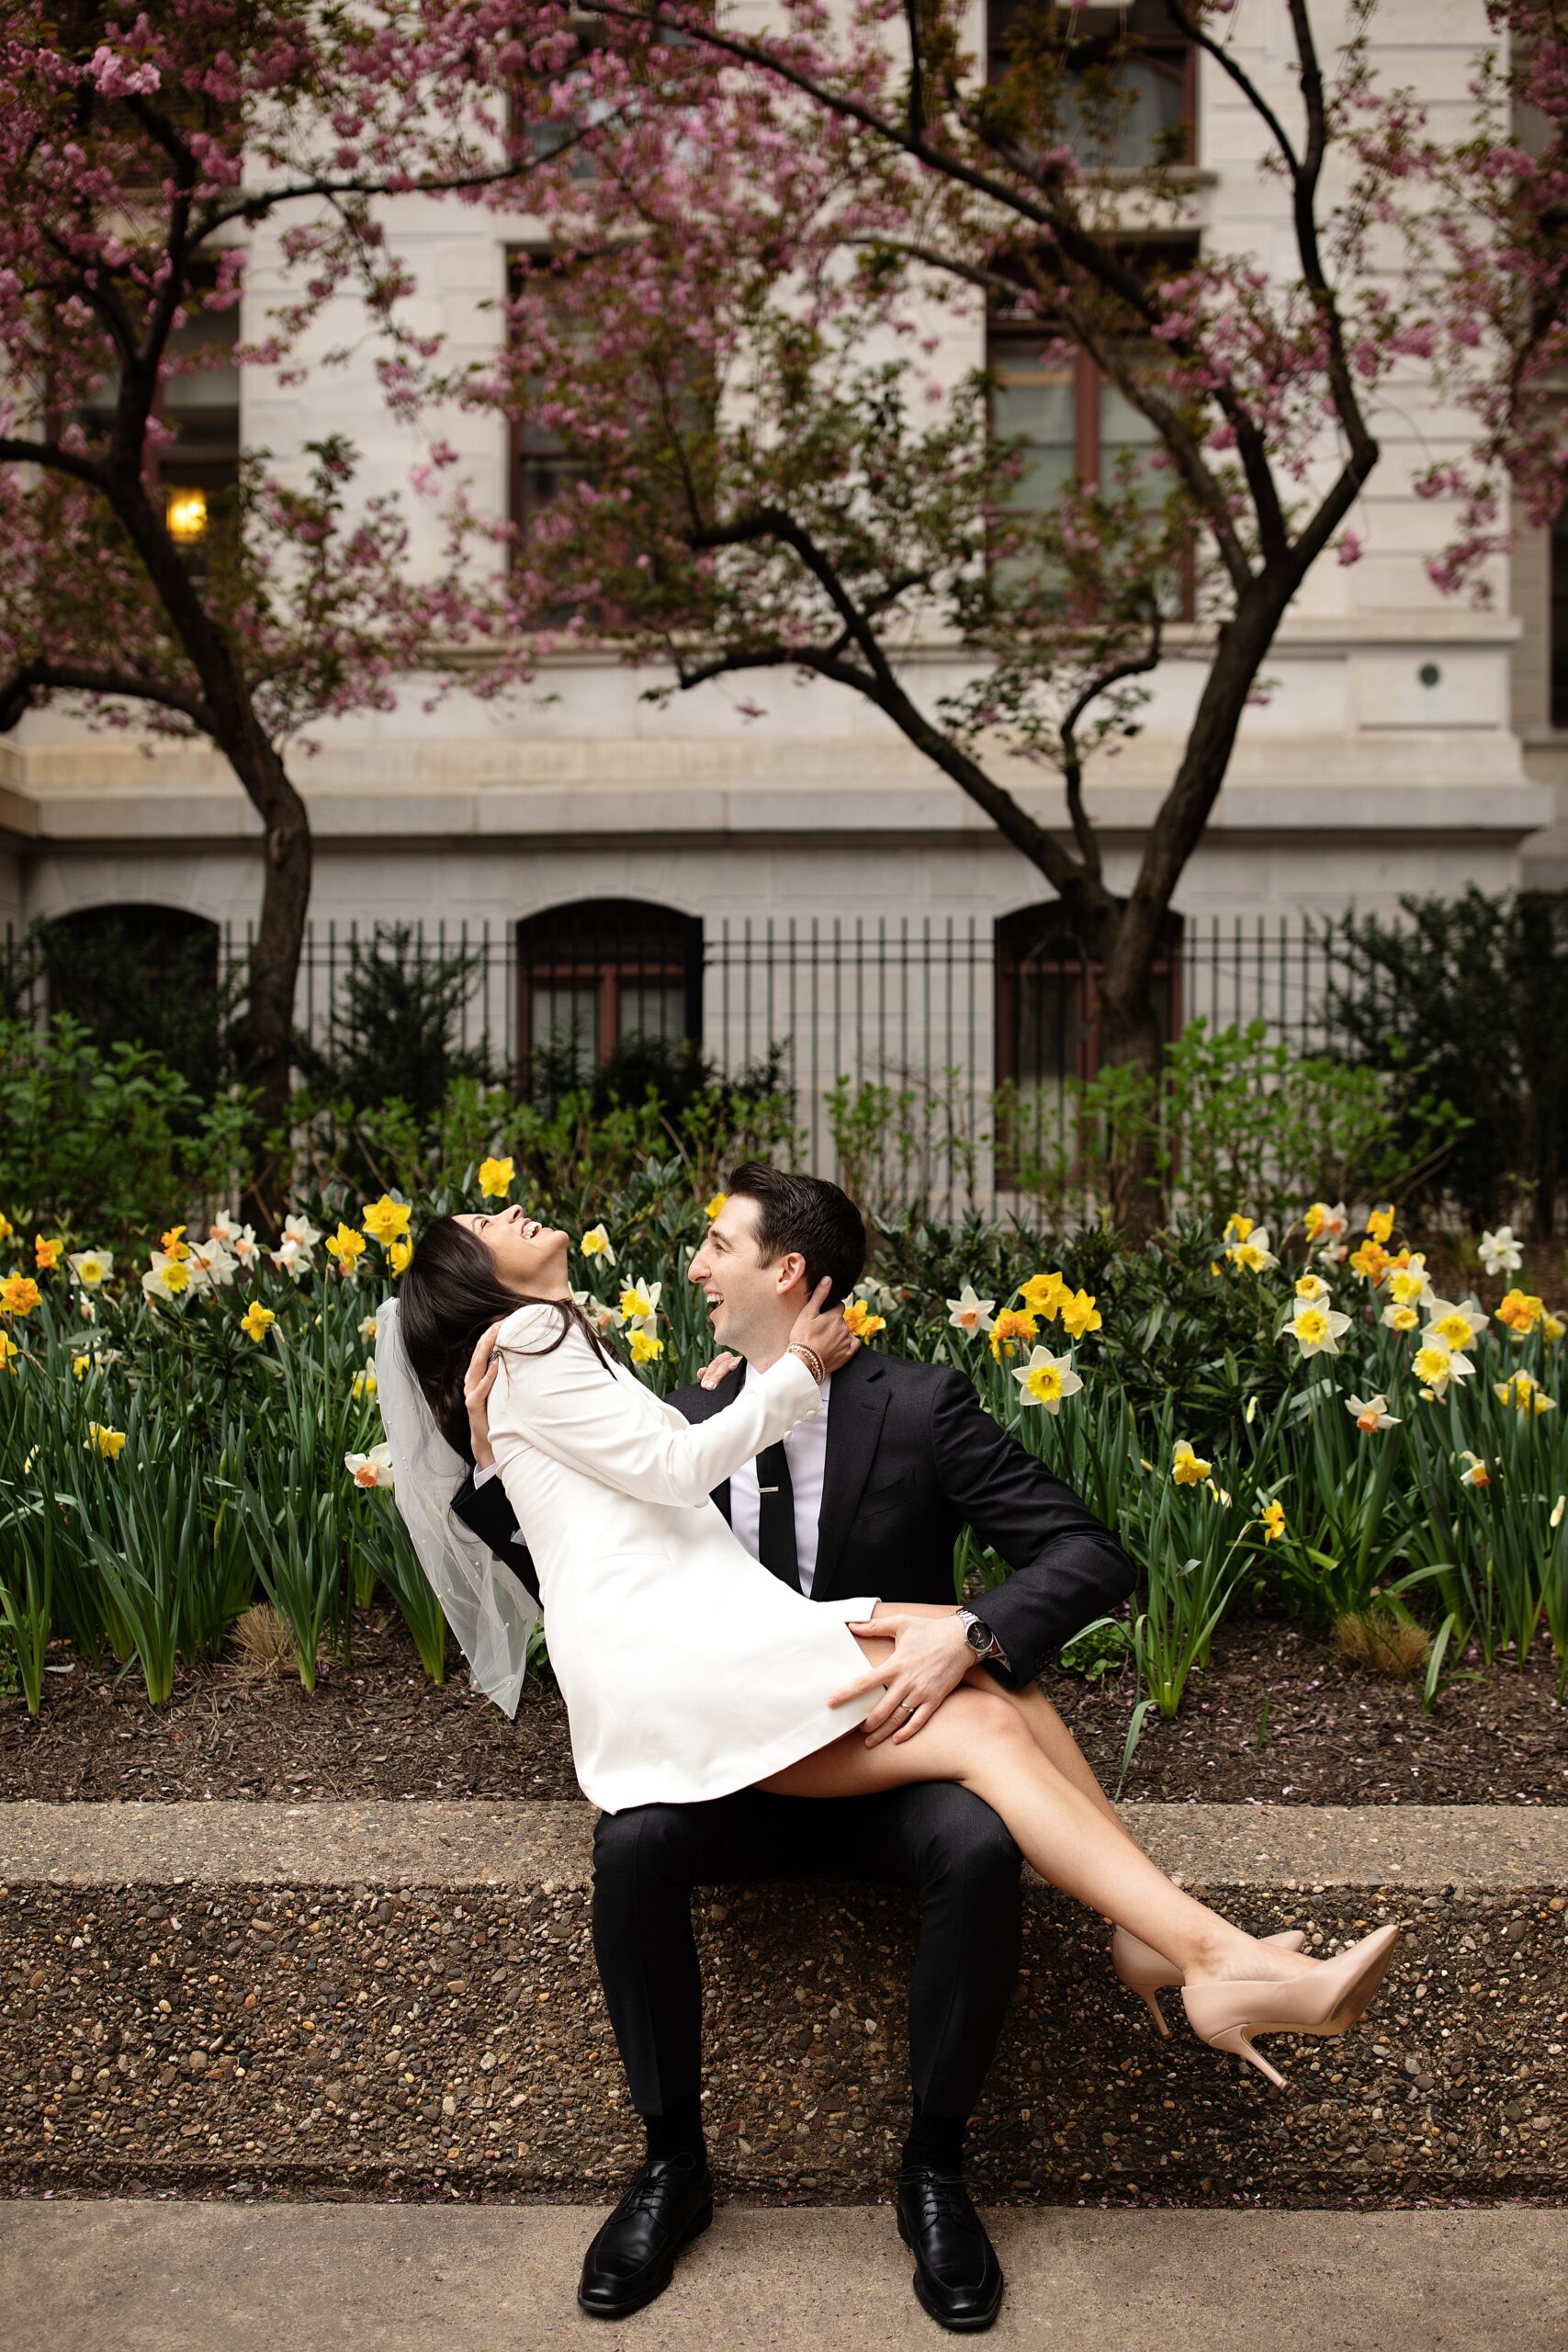 Center City Philadelphia Chic and Modern Spring Elopement, captured by Philadelphia Wedding and Elopement Photographer